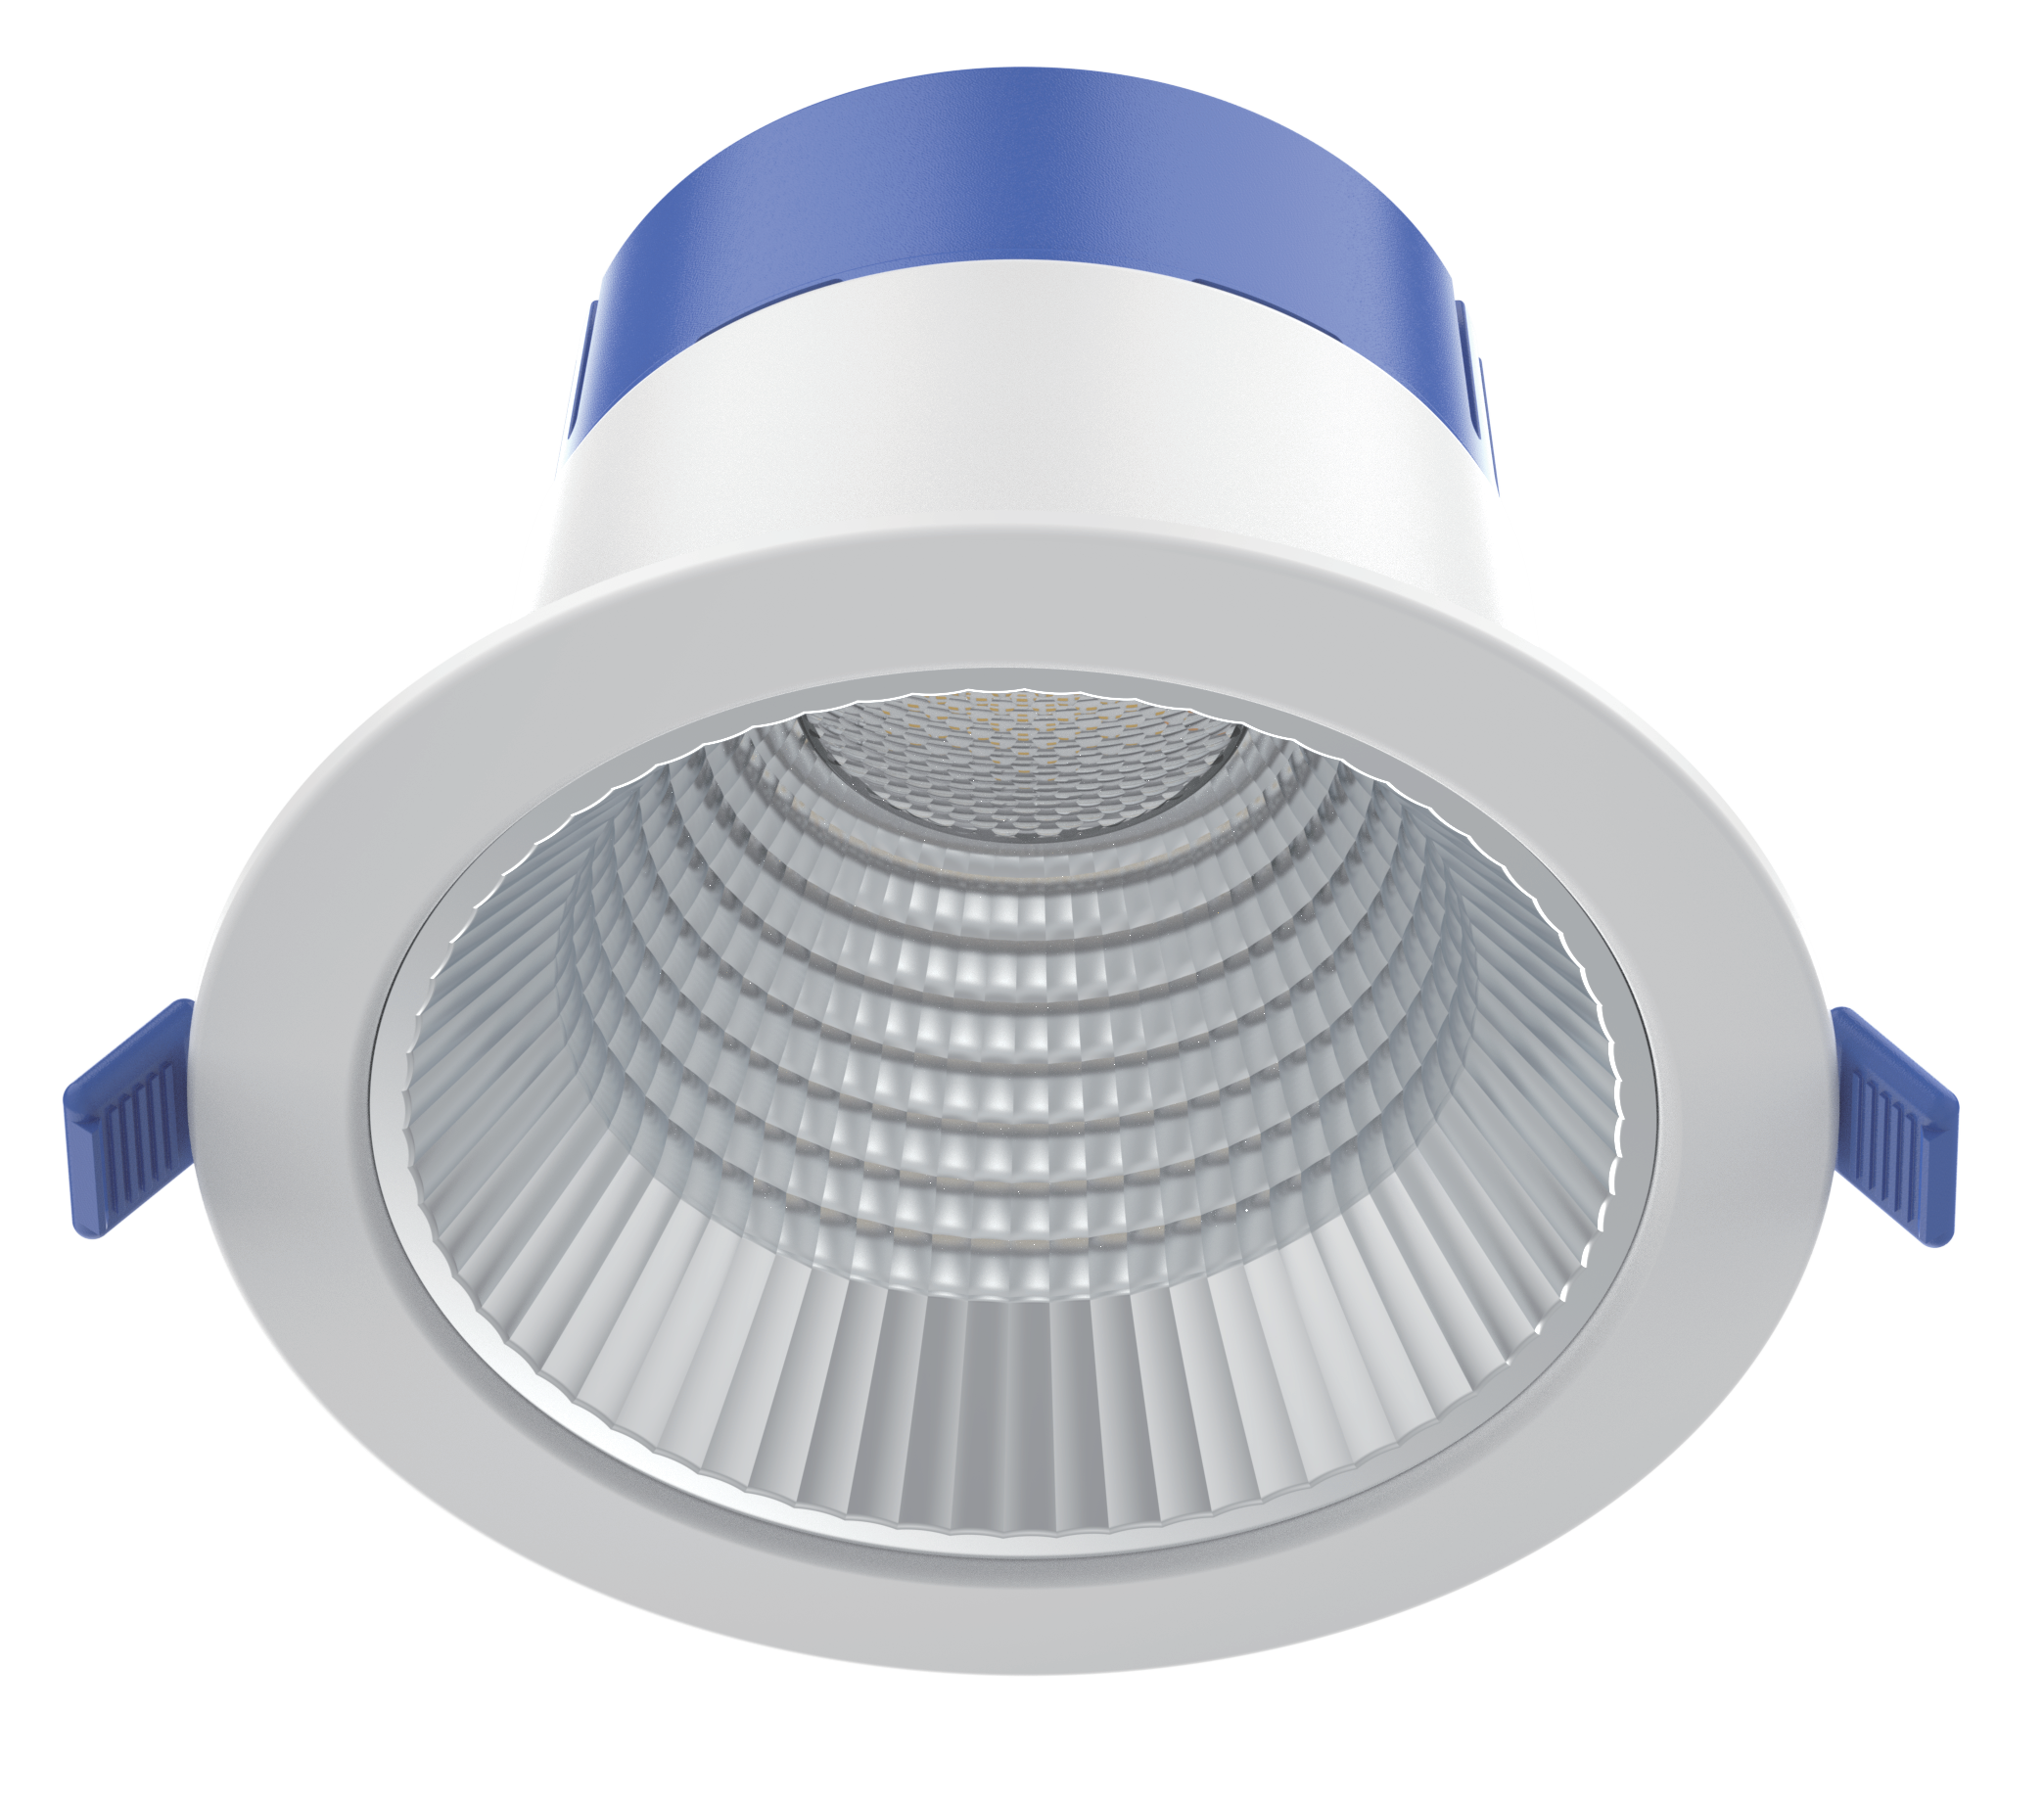 Low price for 8 Inch Cob Led Downlight - Bronco low glare LED  commercial downlight 5RS339/340 – Radiant Lighting